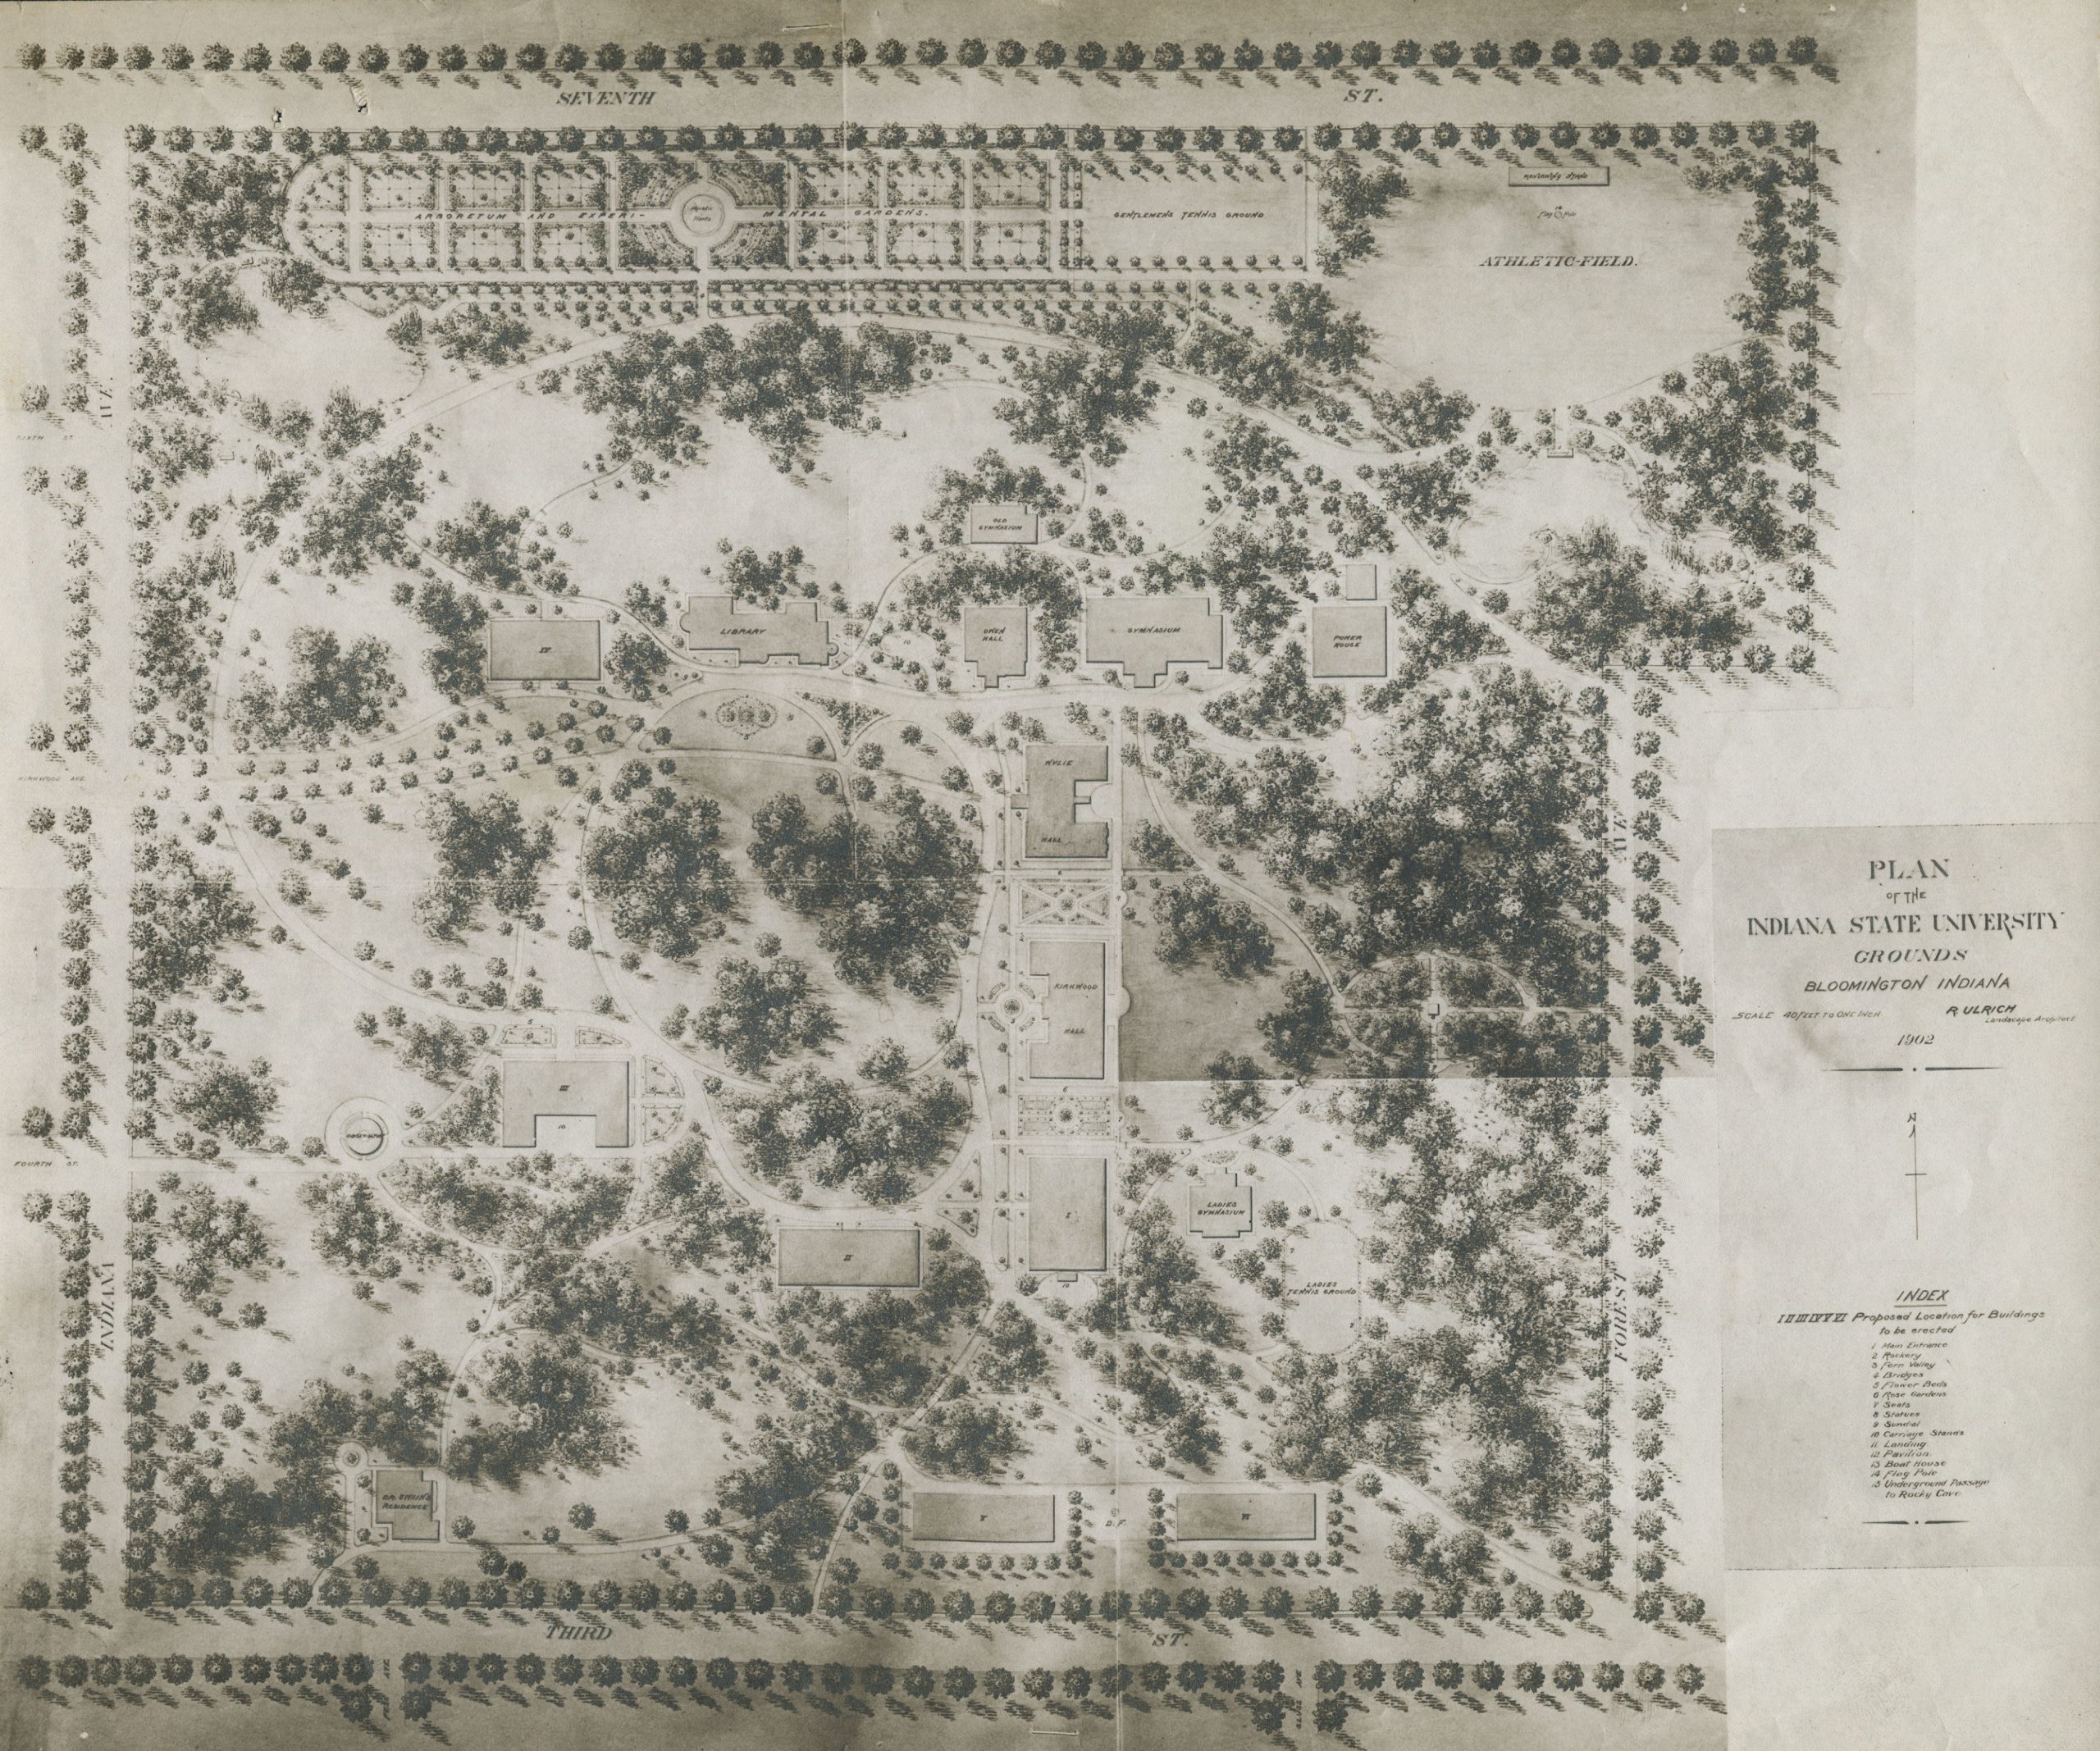 This black-and-white, hand-drawn rendering of the IU Bloomington campus features an aerial view of the campus area between Seventh Street on the north to Third Street on the south, and Indiana Avenue on the west and Forest Avenue on the East. The map legend, labeled "Plan of the Indiana State University Grounds," is located in the bottom right corner of rendering.